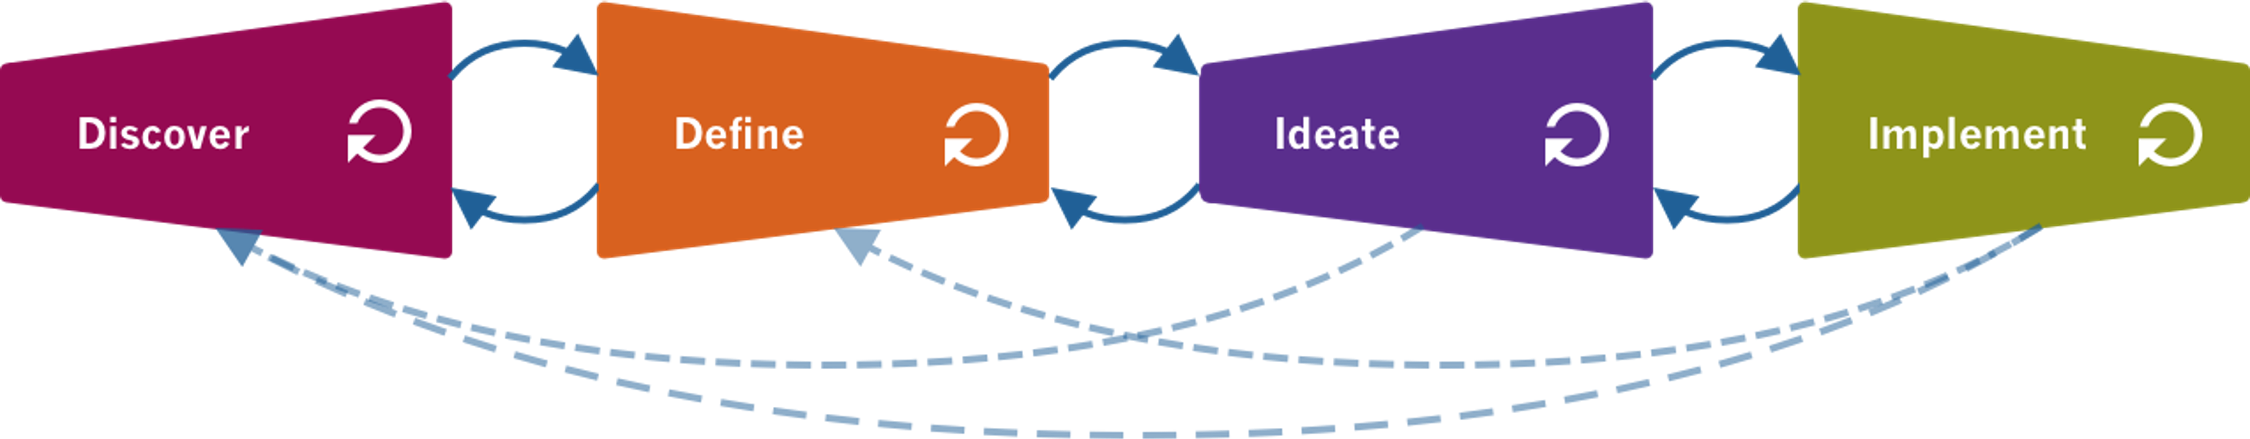 The user-centered design process, highlighting phase 1 "Discover"